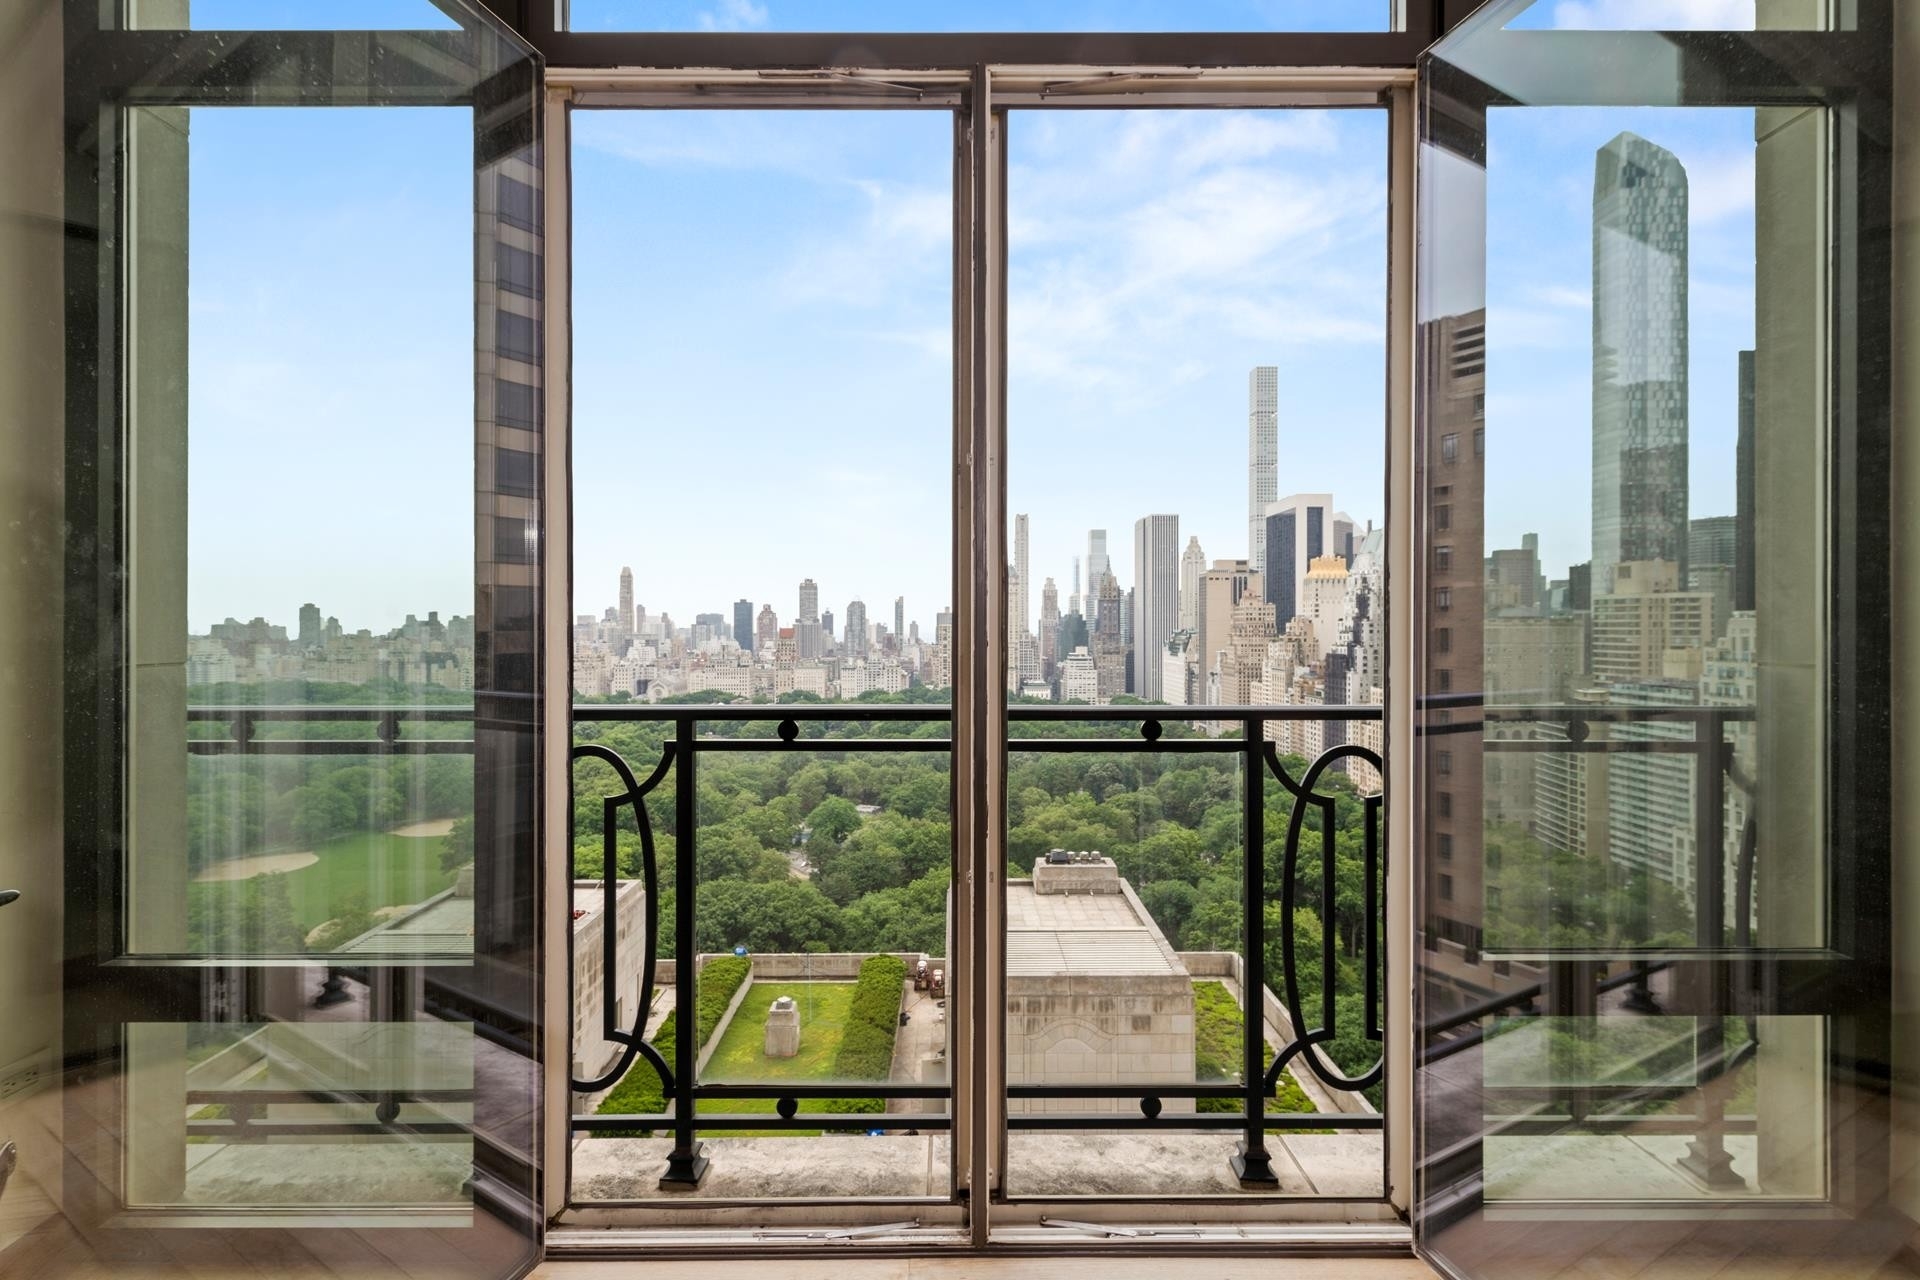 Condominium for Sale at 15 Cpw, 15 CENTRAL PARK W, 26B Lincoln Square, New York, New York 10023